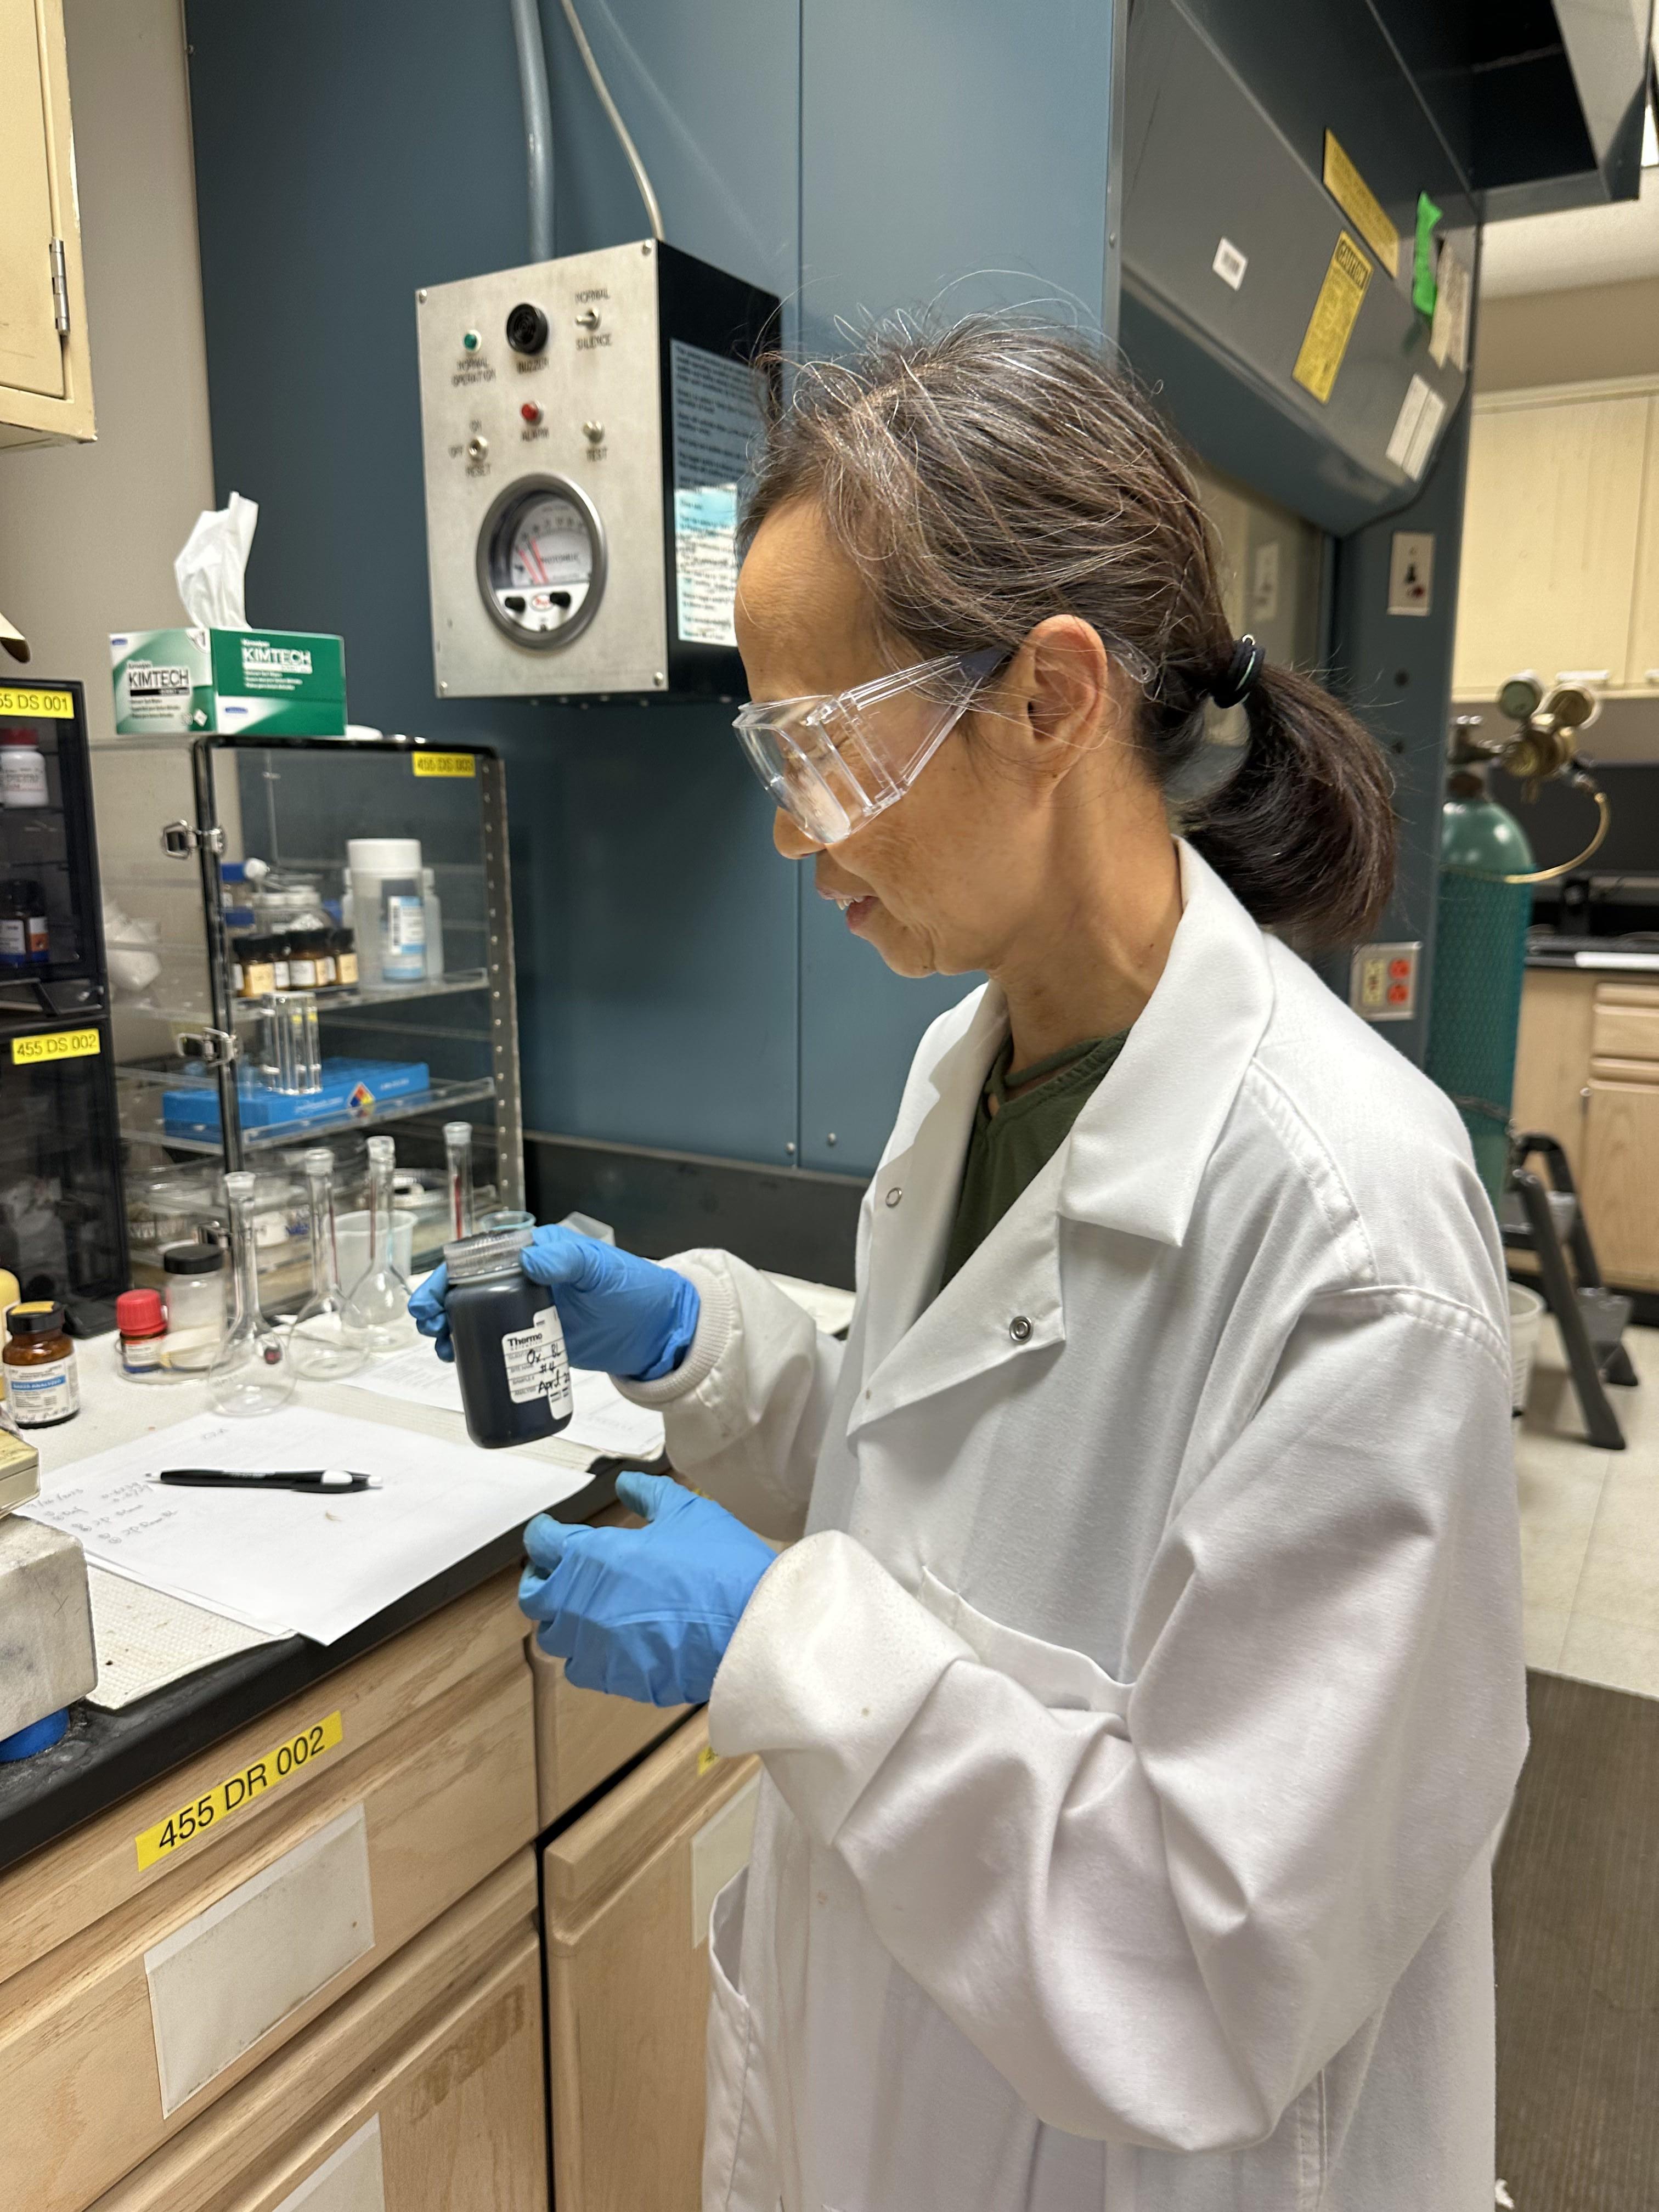 Xiaoyan Zeng, an RBI Research Scientist preparing black liquor for identifying anions